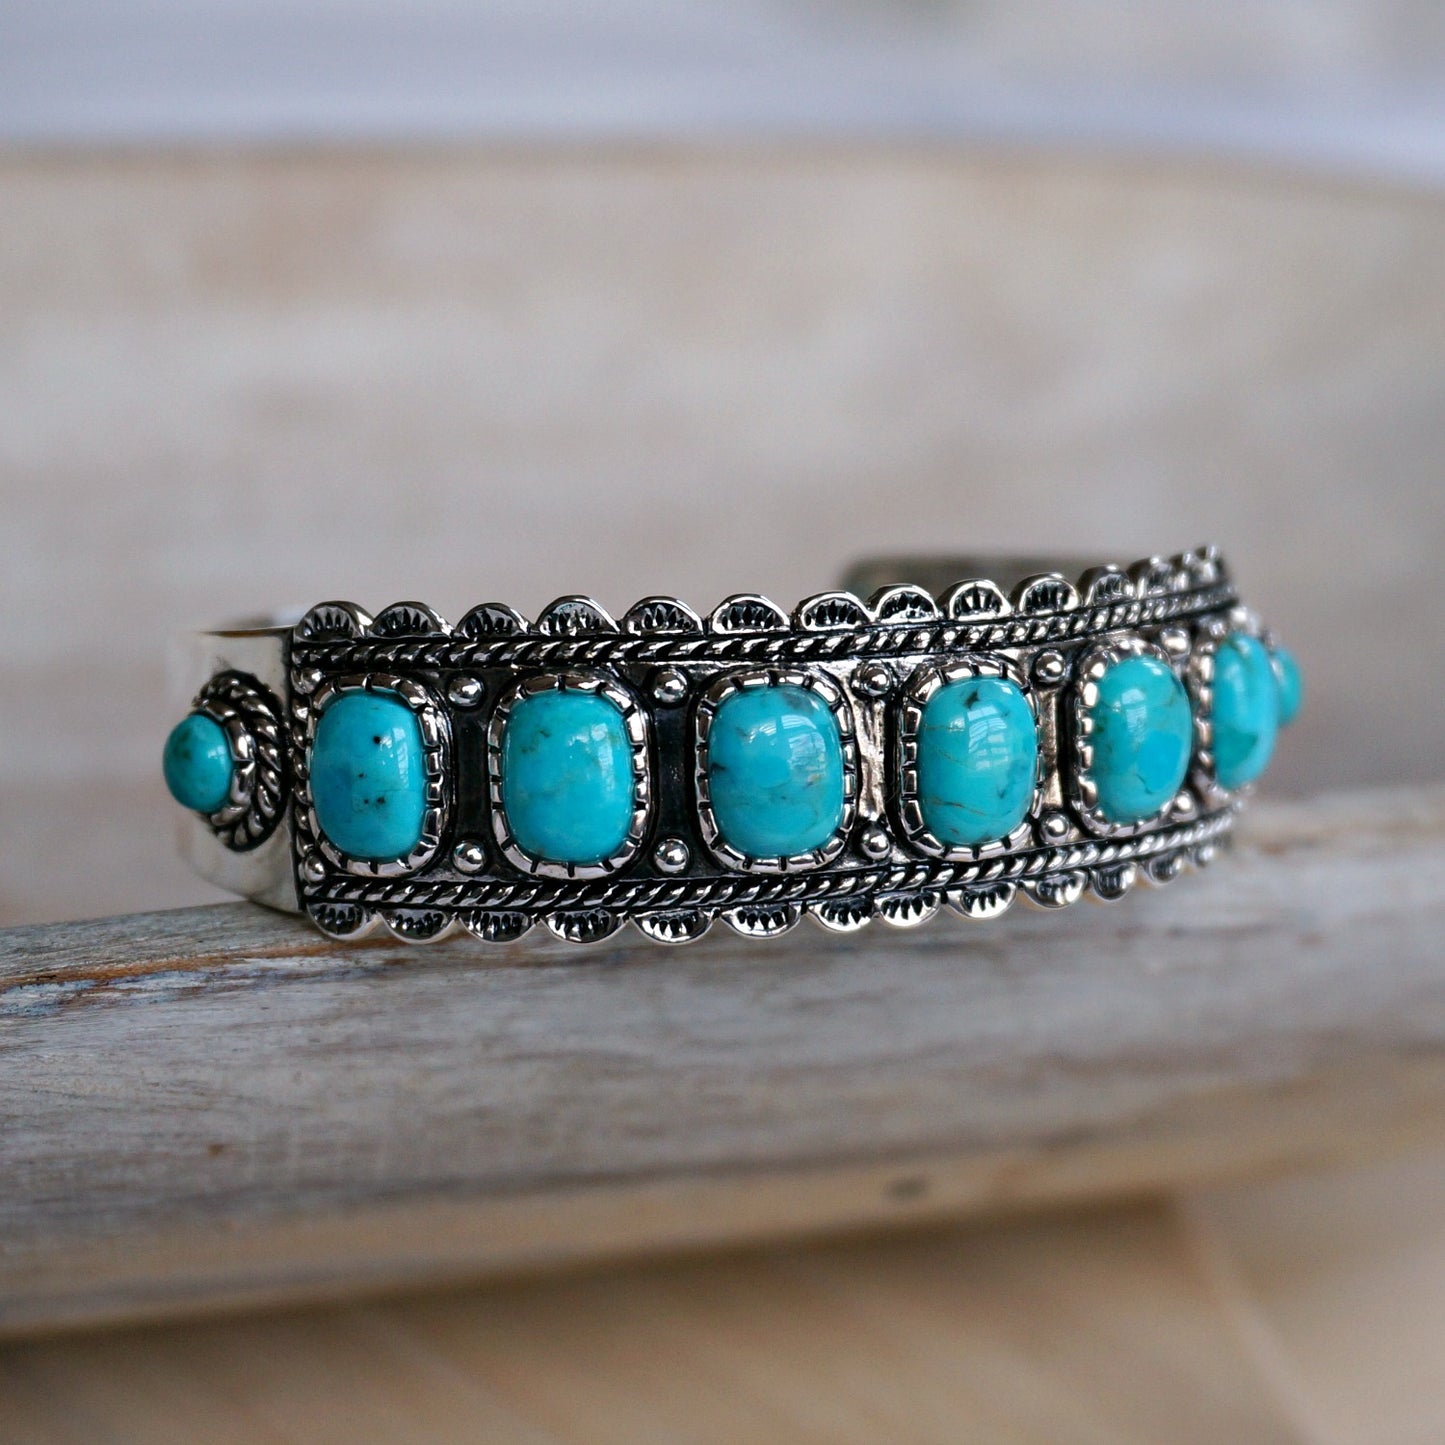 Old Navajo Blue Gem Turquoise Bracelet of Twisted Wire – Turquoise & Tufa